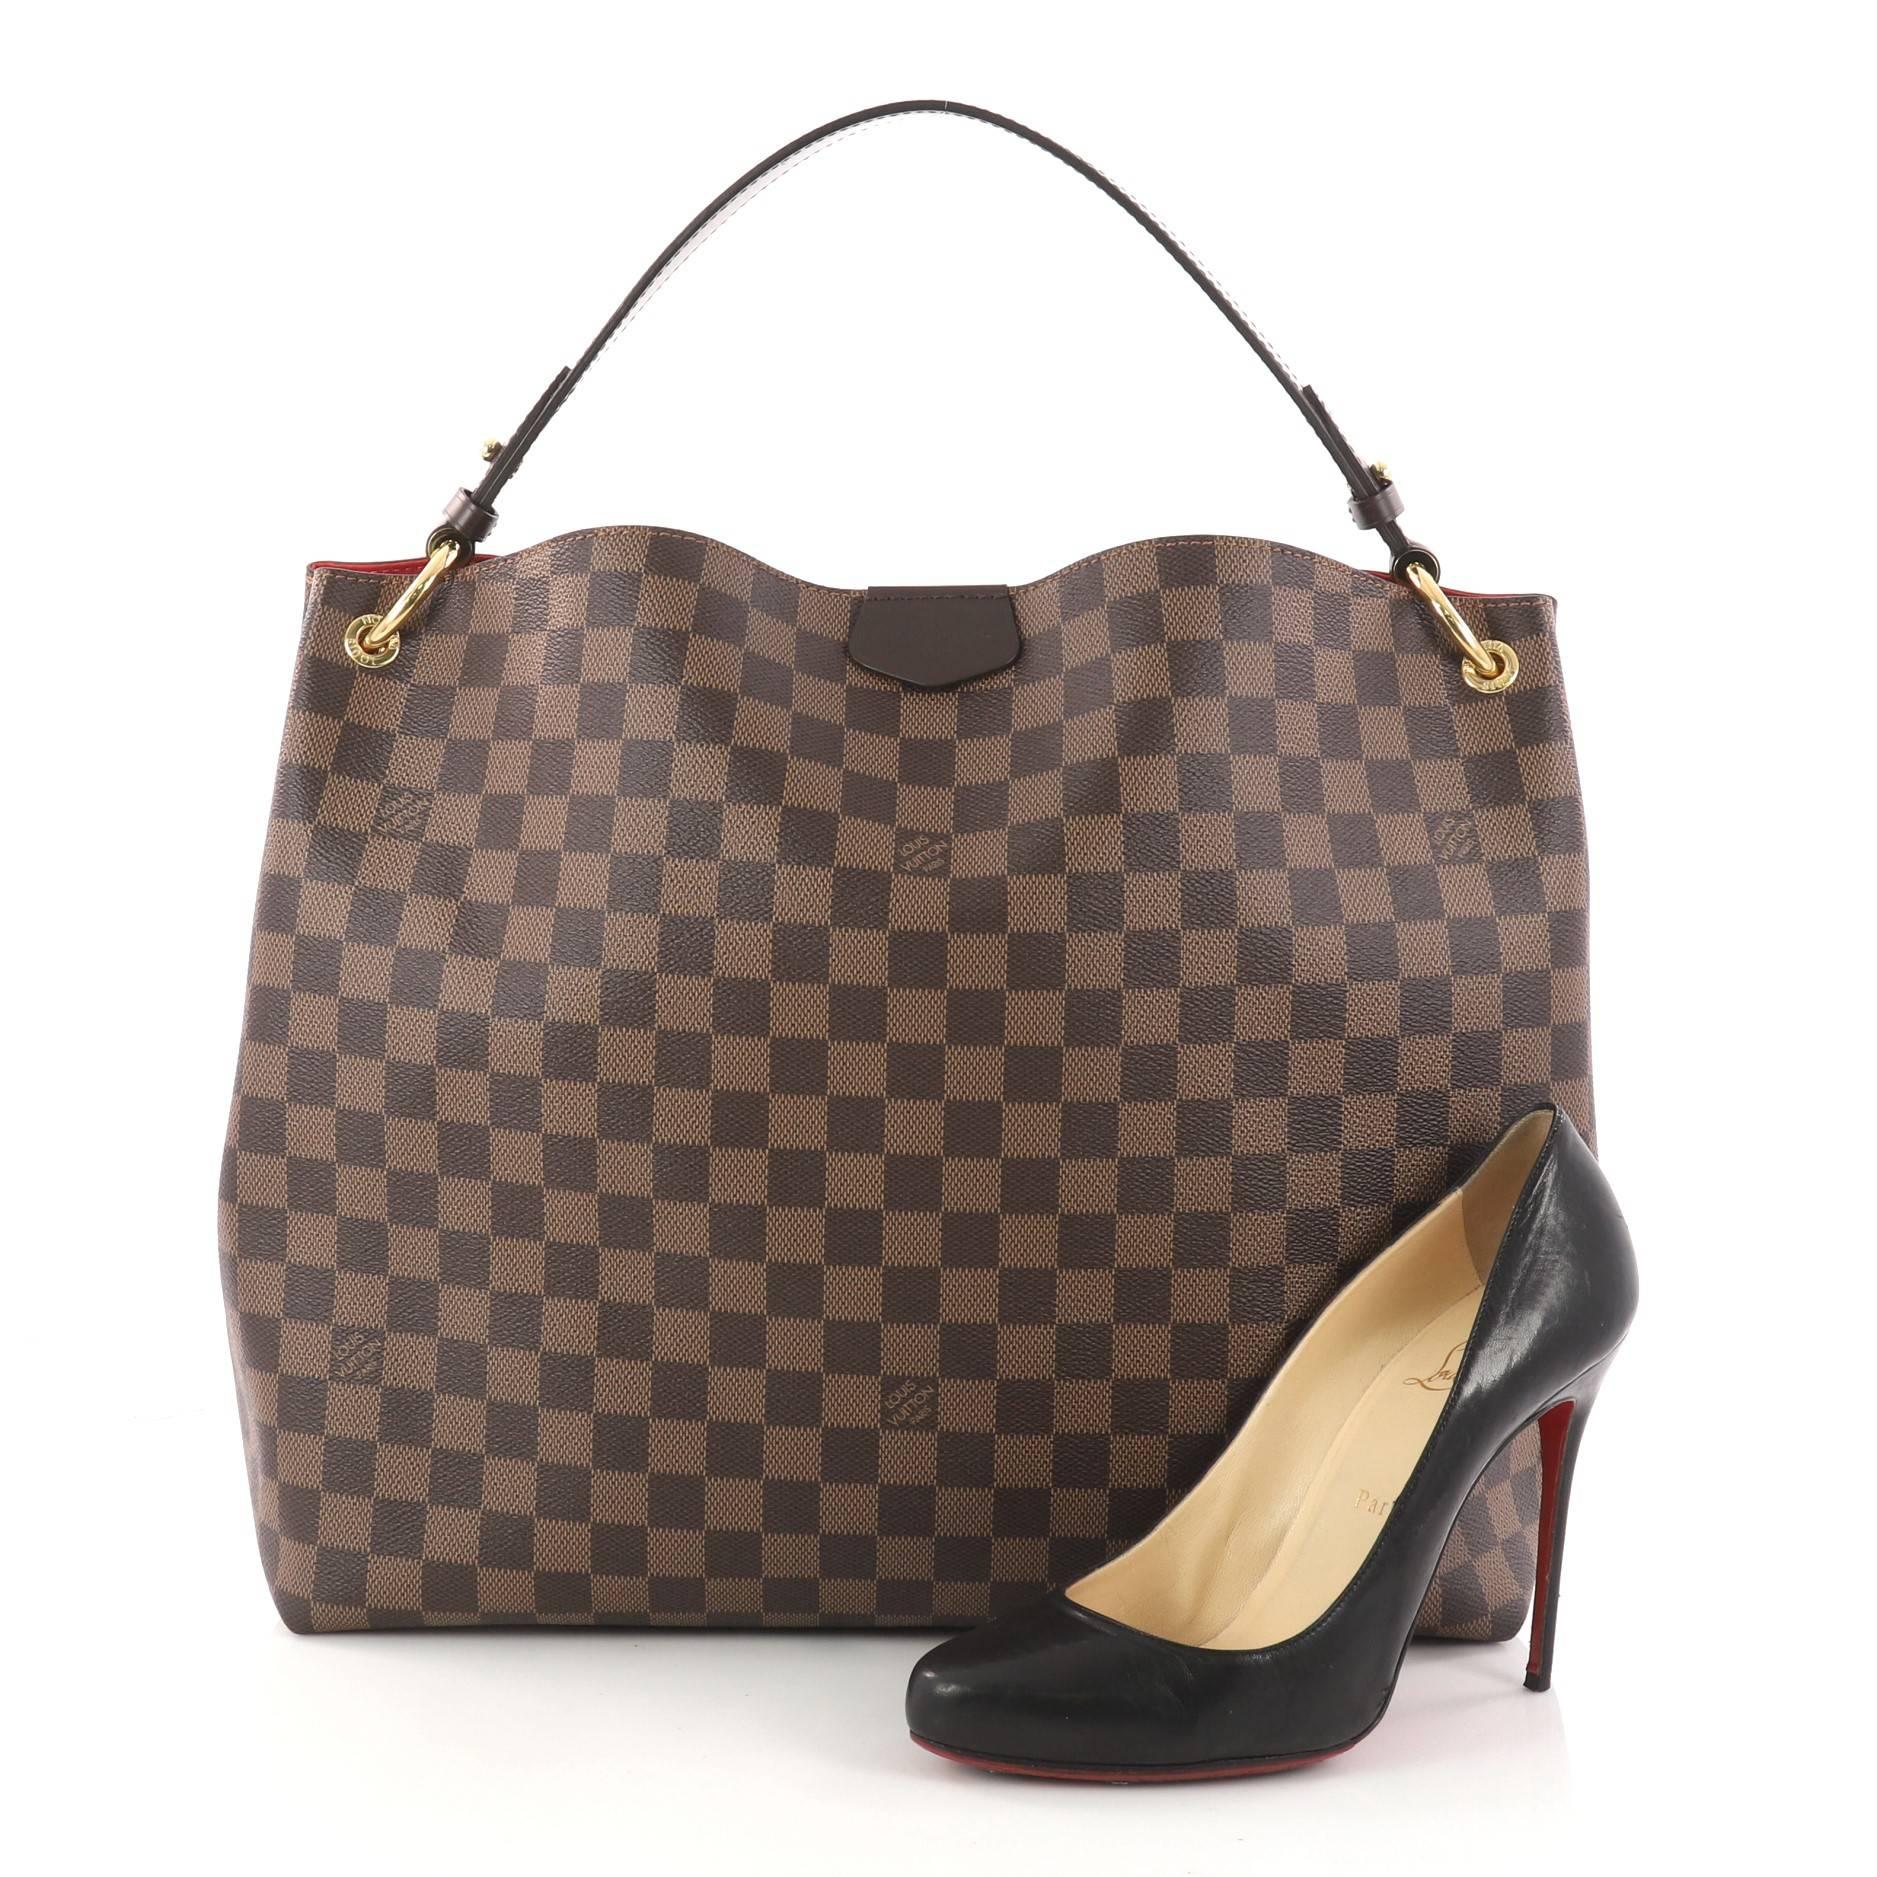 This authentic Louis Vuitton Graceful Handbag Damier MM from 2018 is a stylish bag that's sure to be an instant favorite. Crafted in damier ebene coated canvas, this gorgeous bag features a flat leather shoulder strap, dark brown leather trims, and